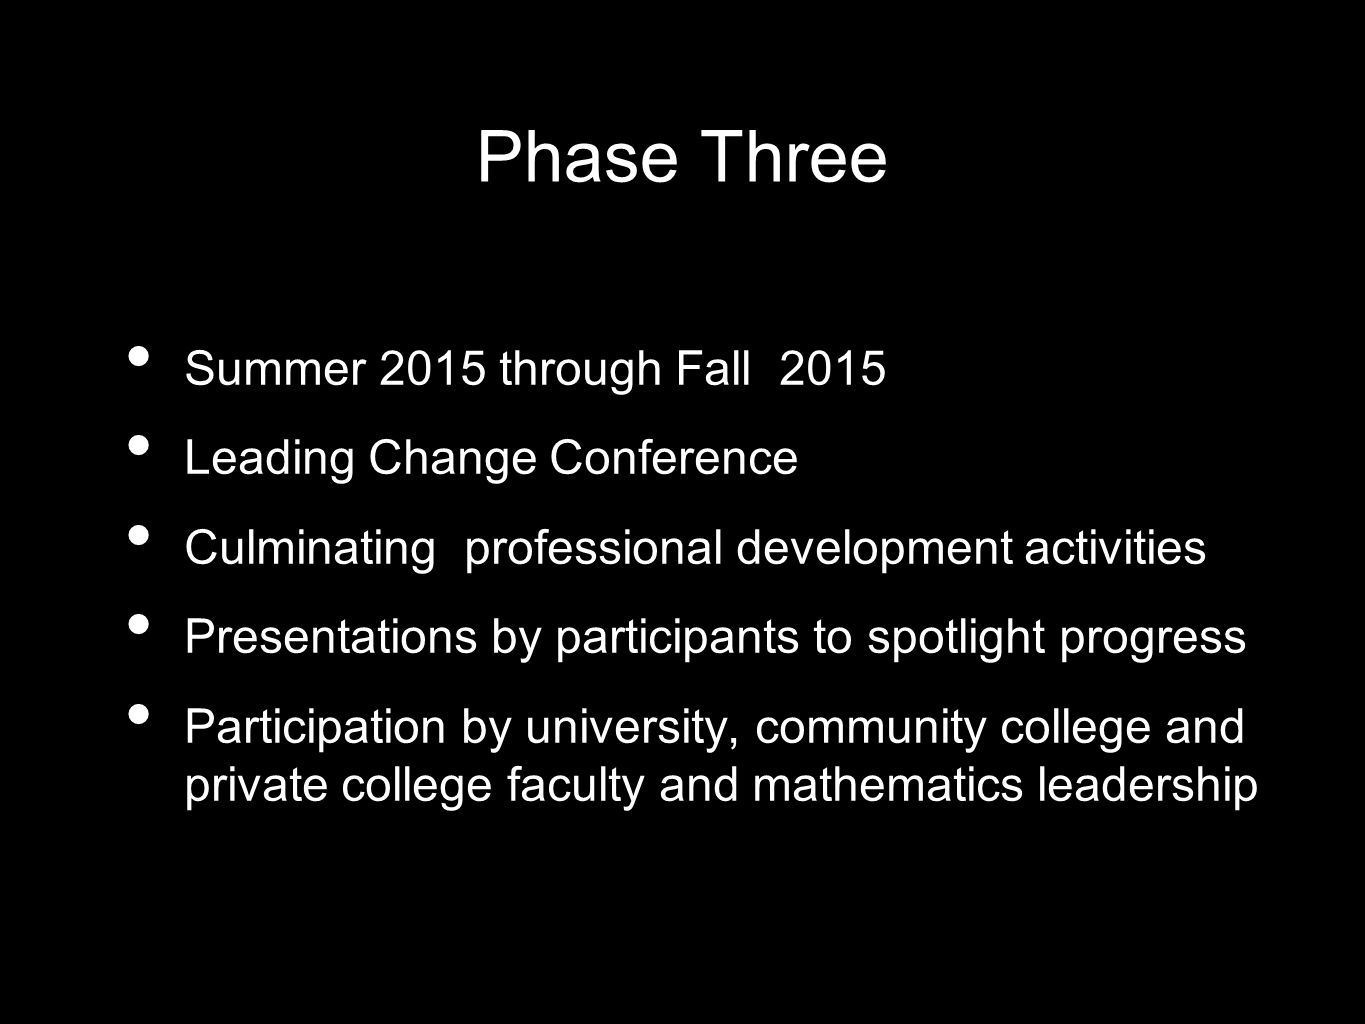 Phase Three Summer 2015 through Fall 2015 Leading Change Conference Culminating professional development activities Presentations by participants to spotlight progress Participation by university, community college and private college faculty and mathematics leadership